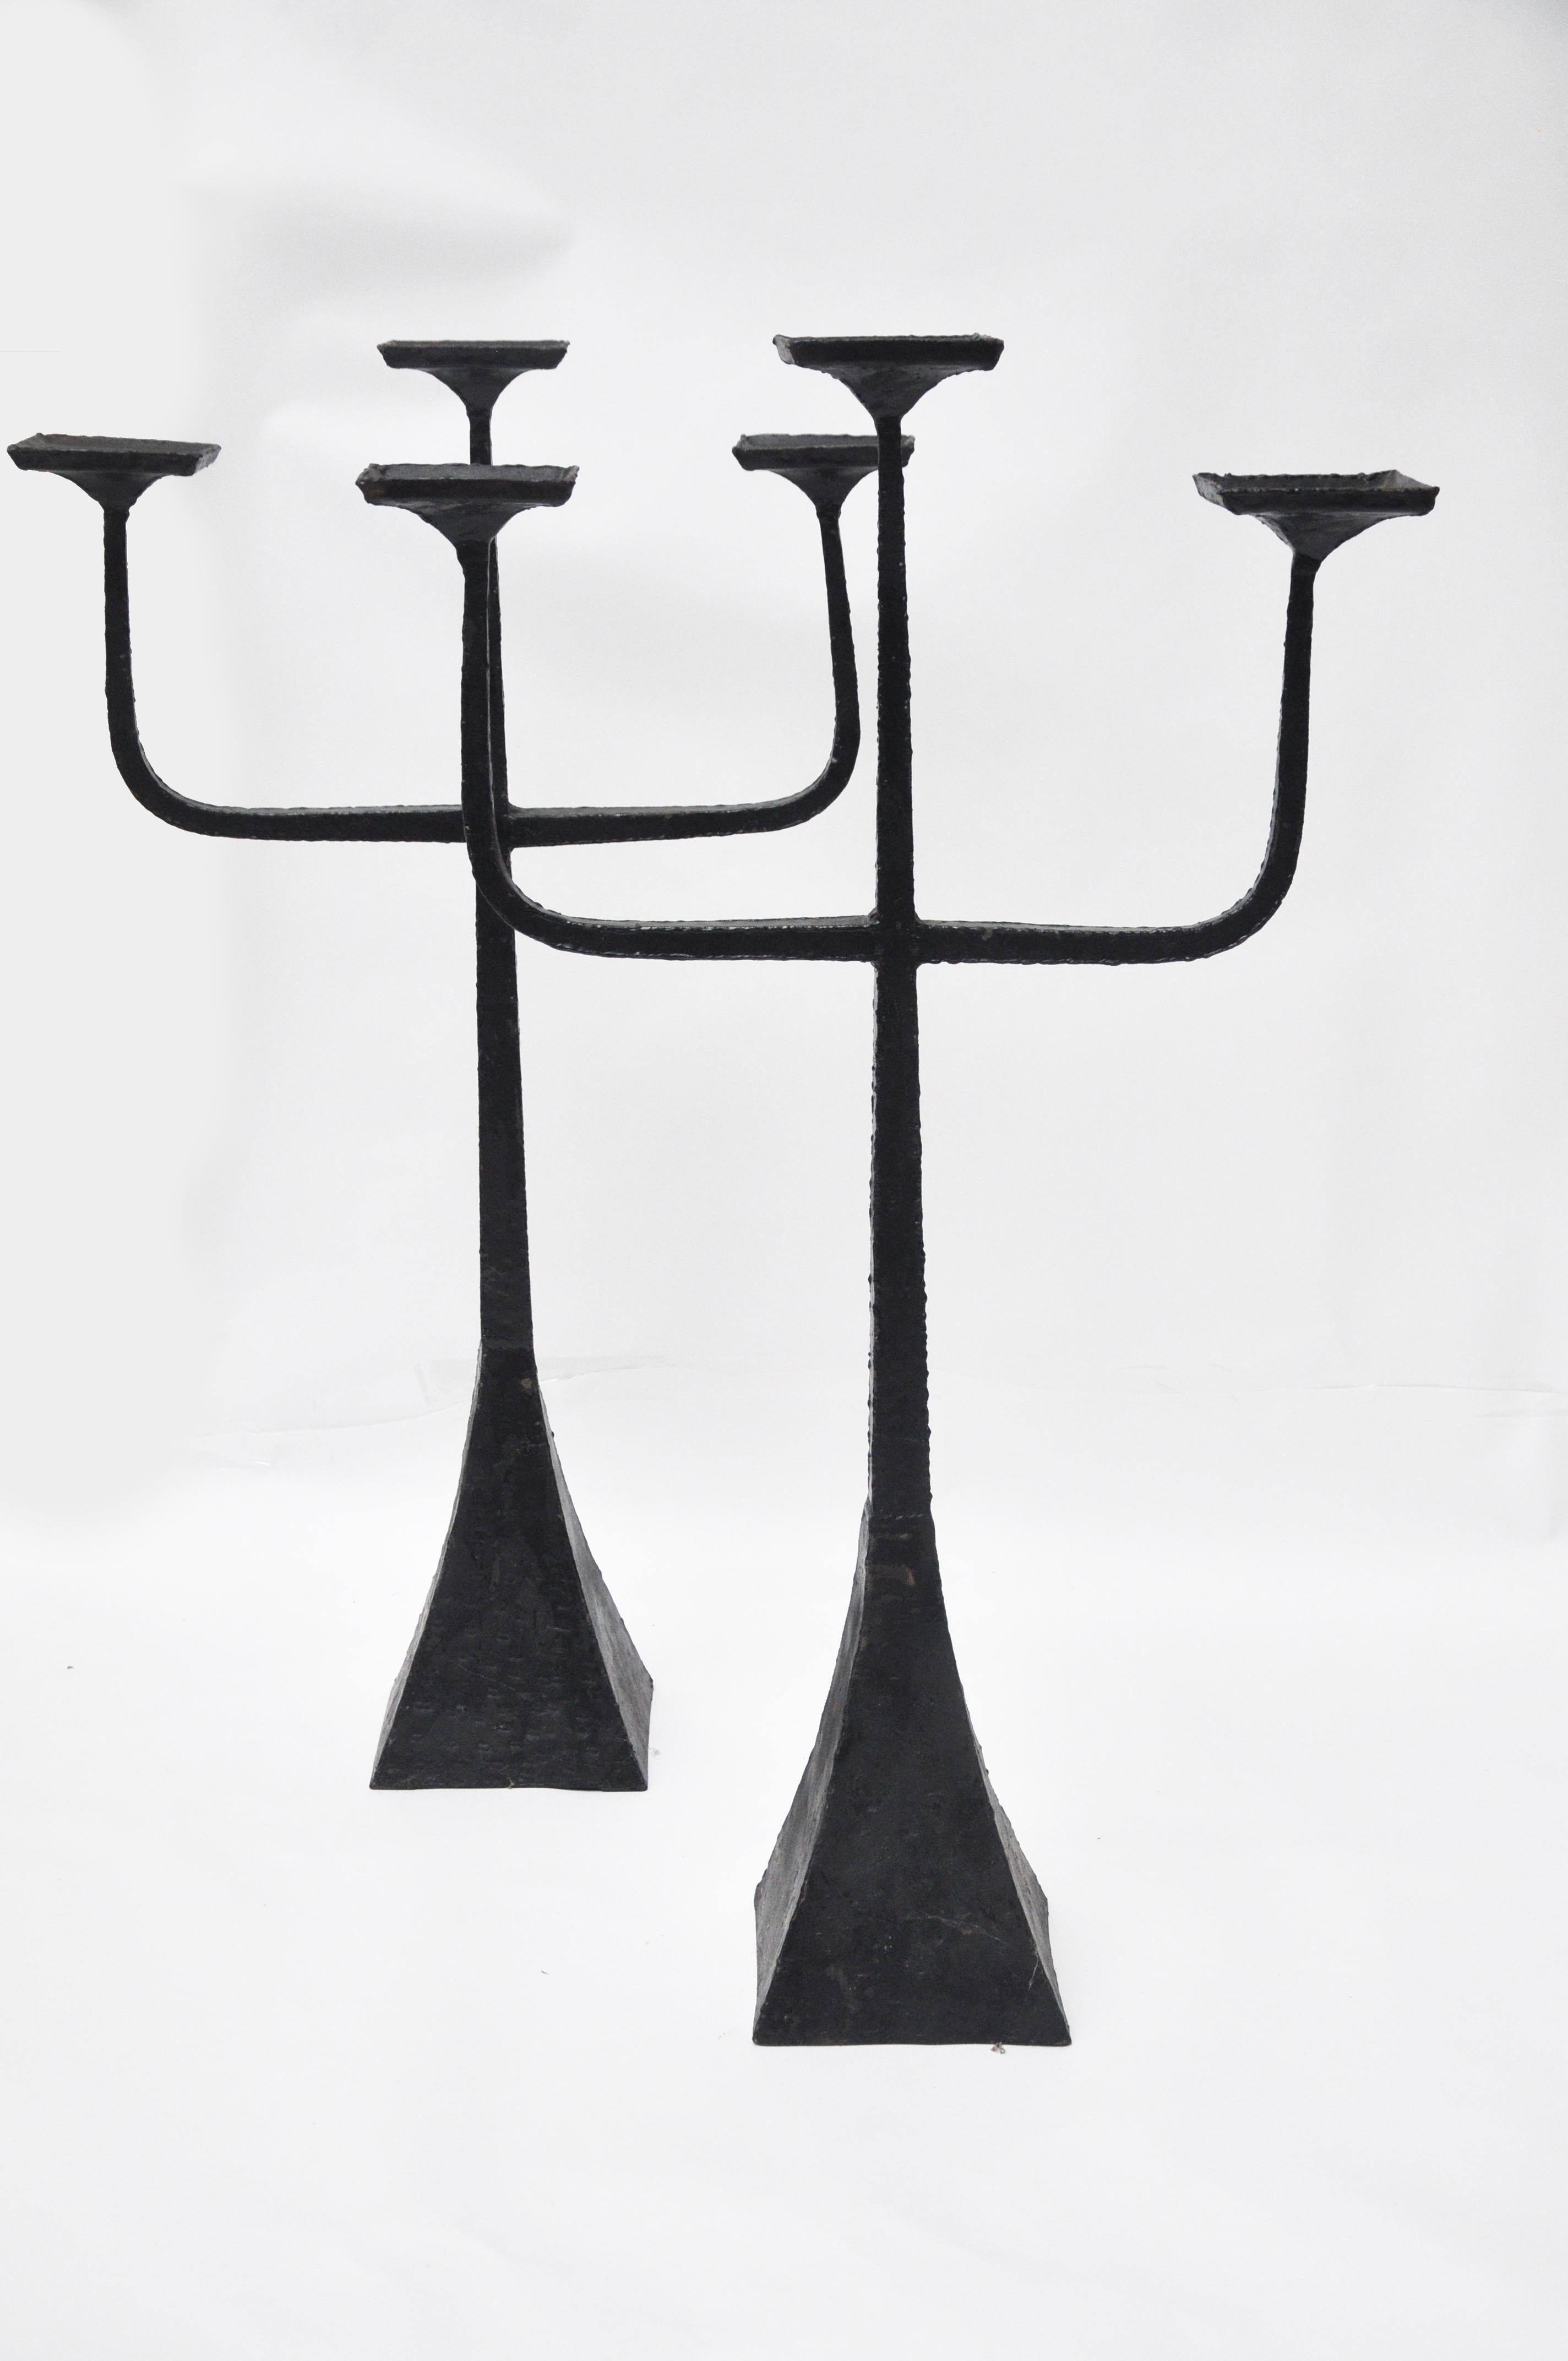 These floor candelabras are handmade of metal. The metal candelabras are painted black. Large pillar candles fit nicely on each of the platforms. The metal appears to be tapped and was not machine made. They are not identical in size due to the fact